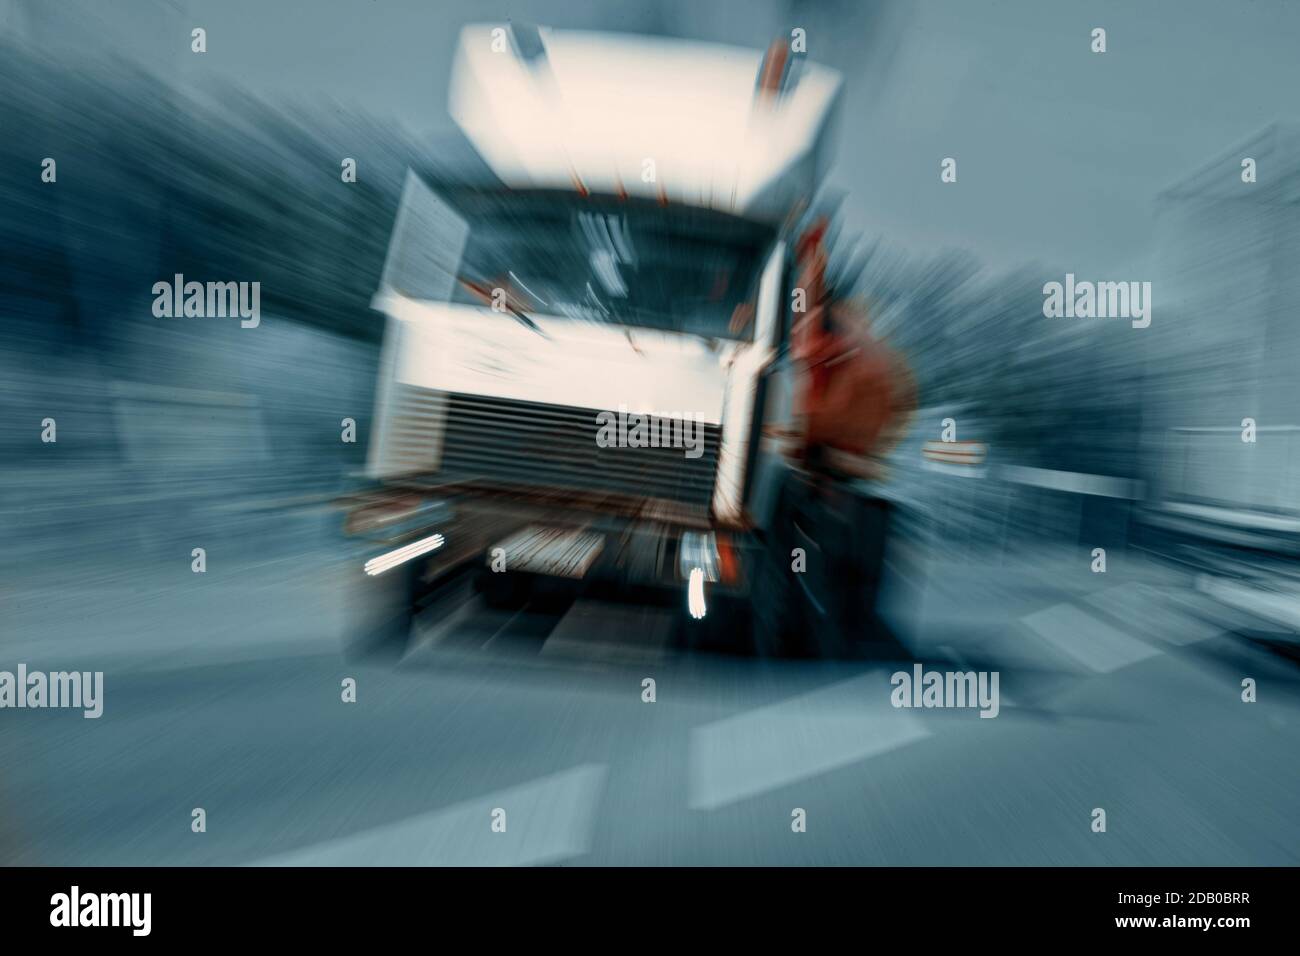 Truck in a blur on the road in motion. The danger of a collision or emergency situation. Violation of rules by truckers Stock Photo